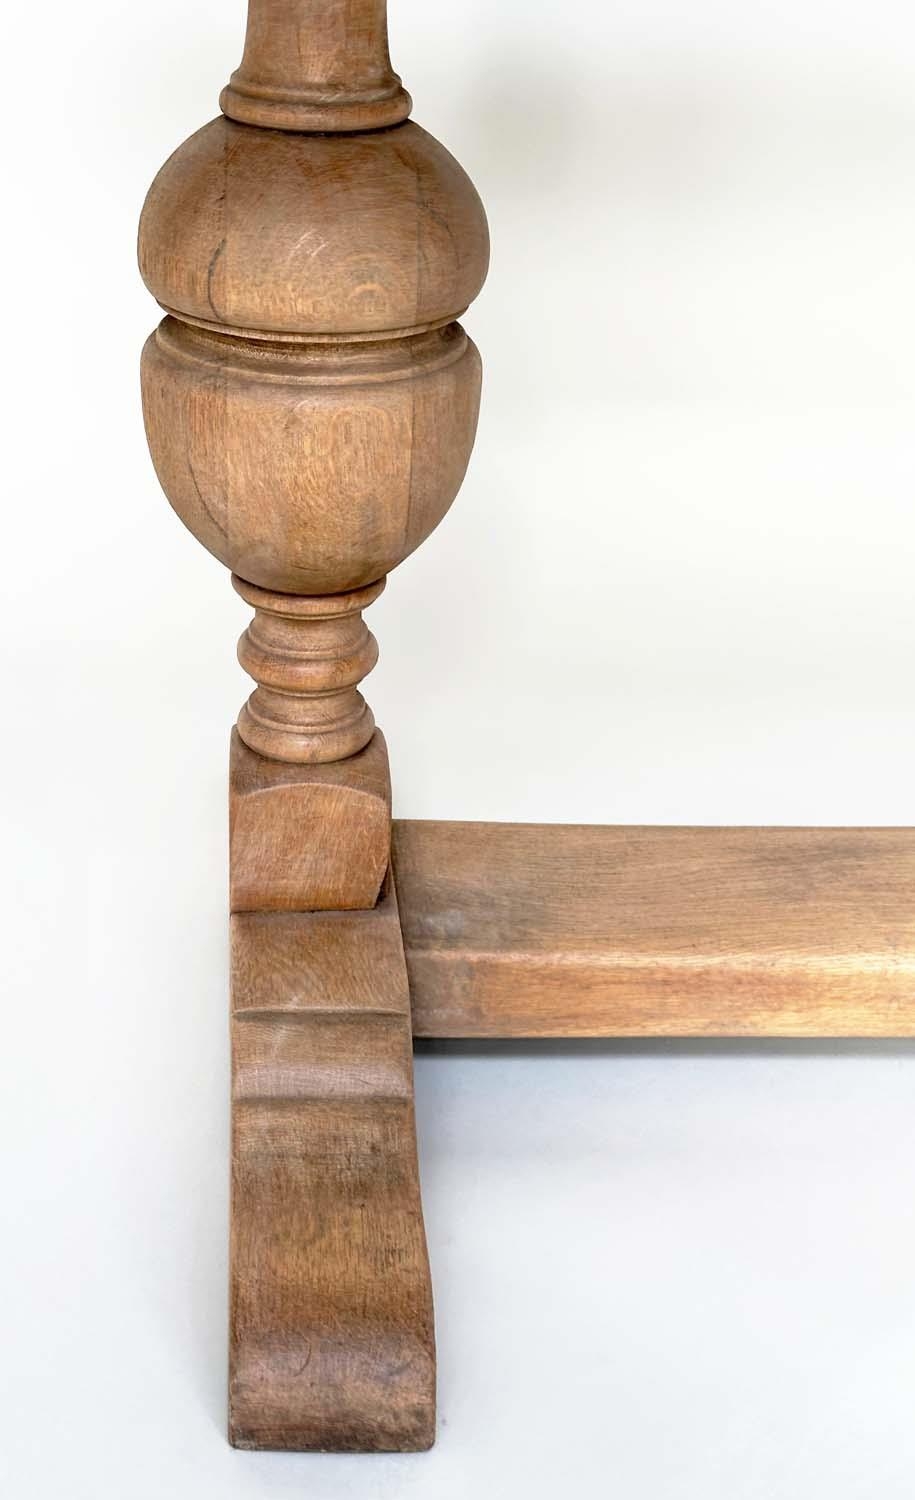 REFECTORY TABLE, early English style oak with planked top, cup and cover turned pillar trestles - Image 4 of 12